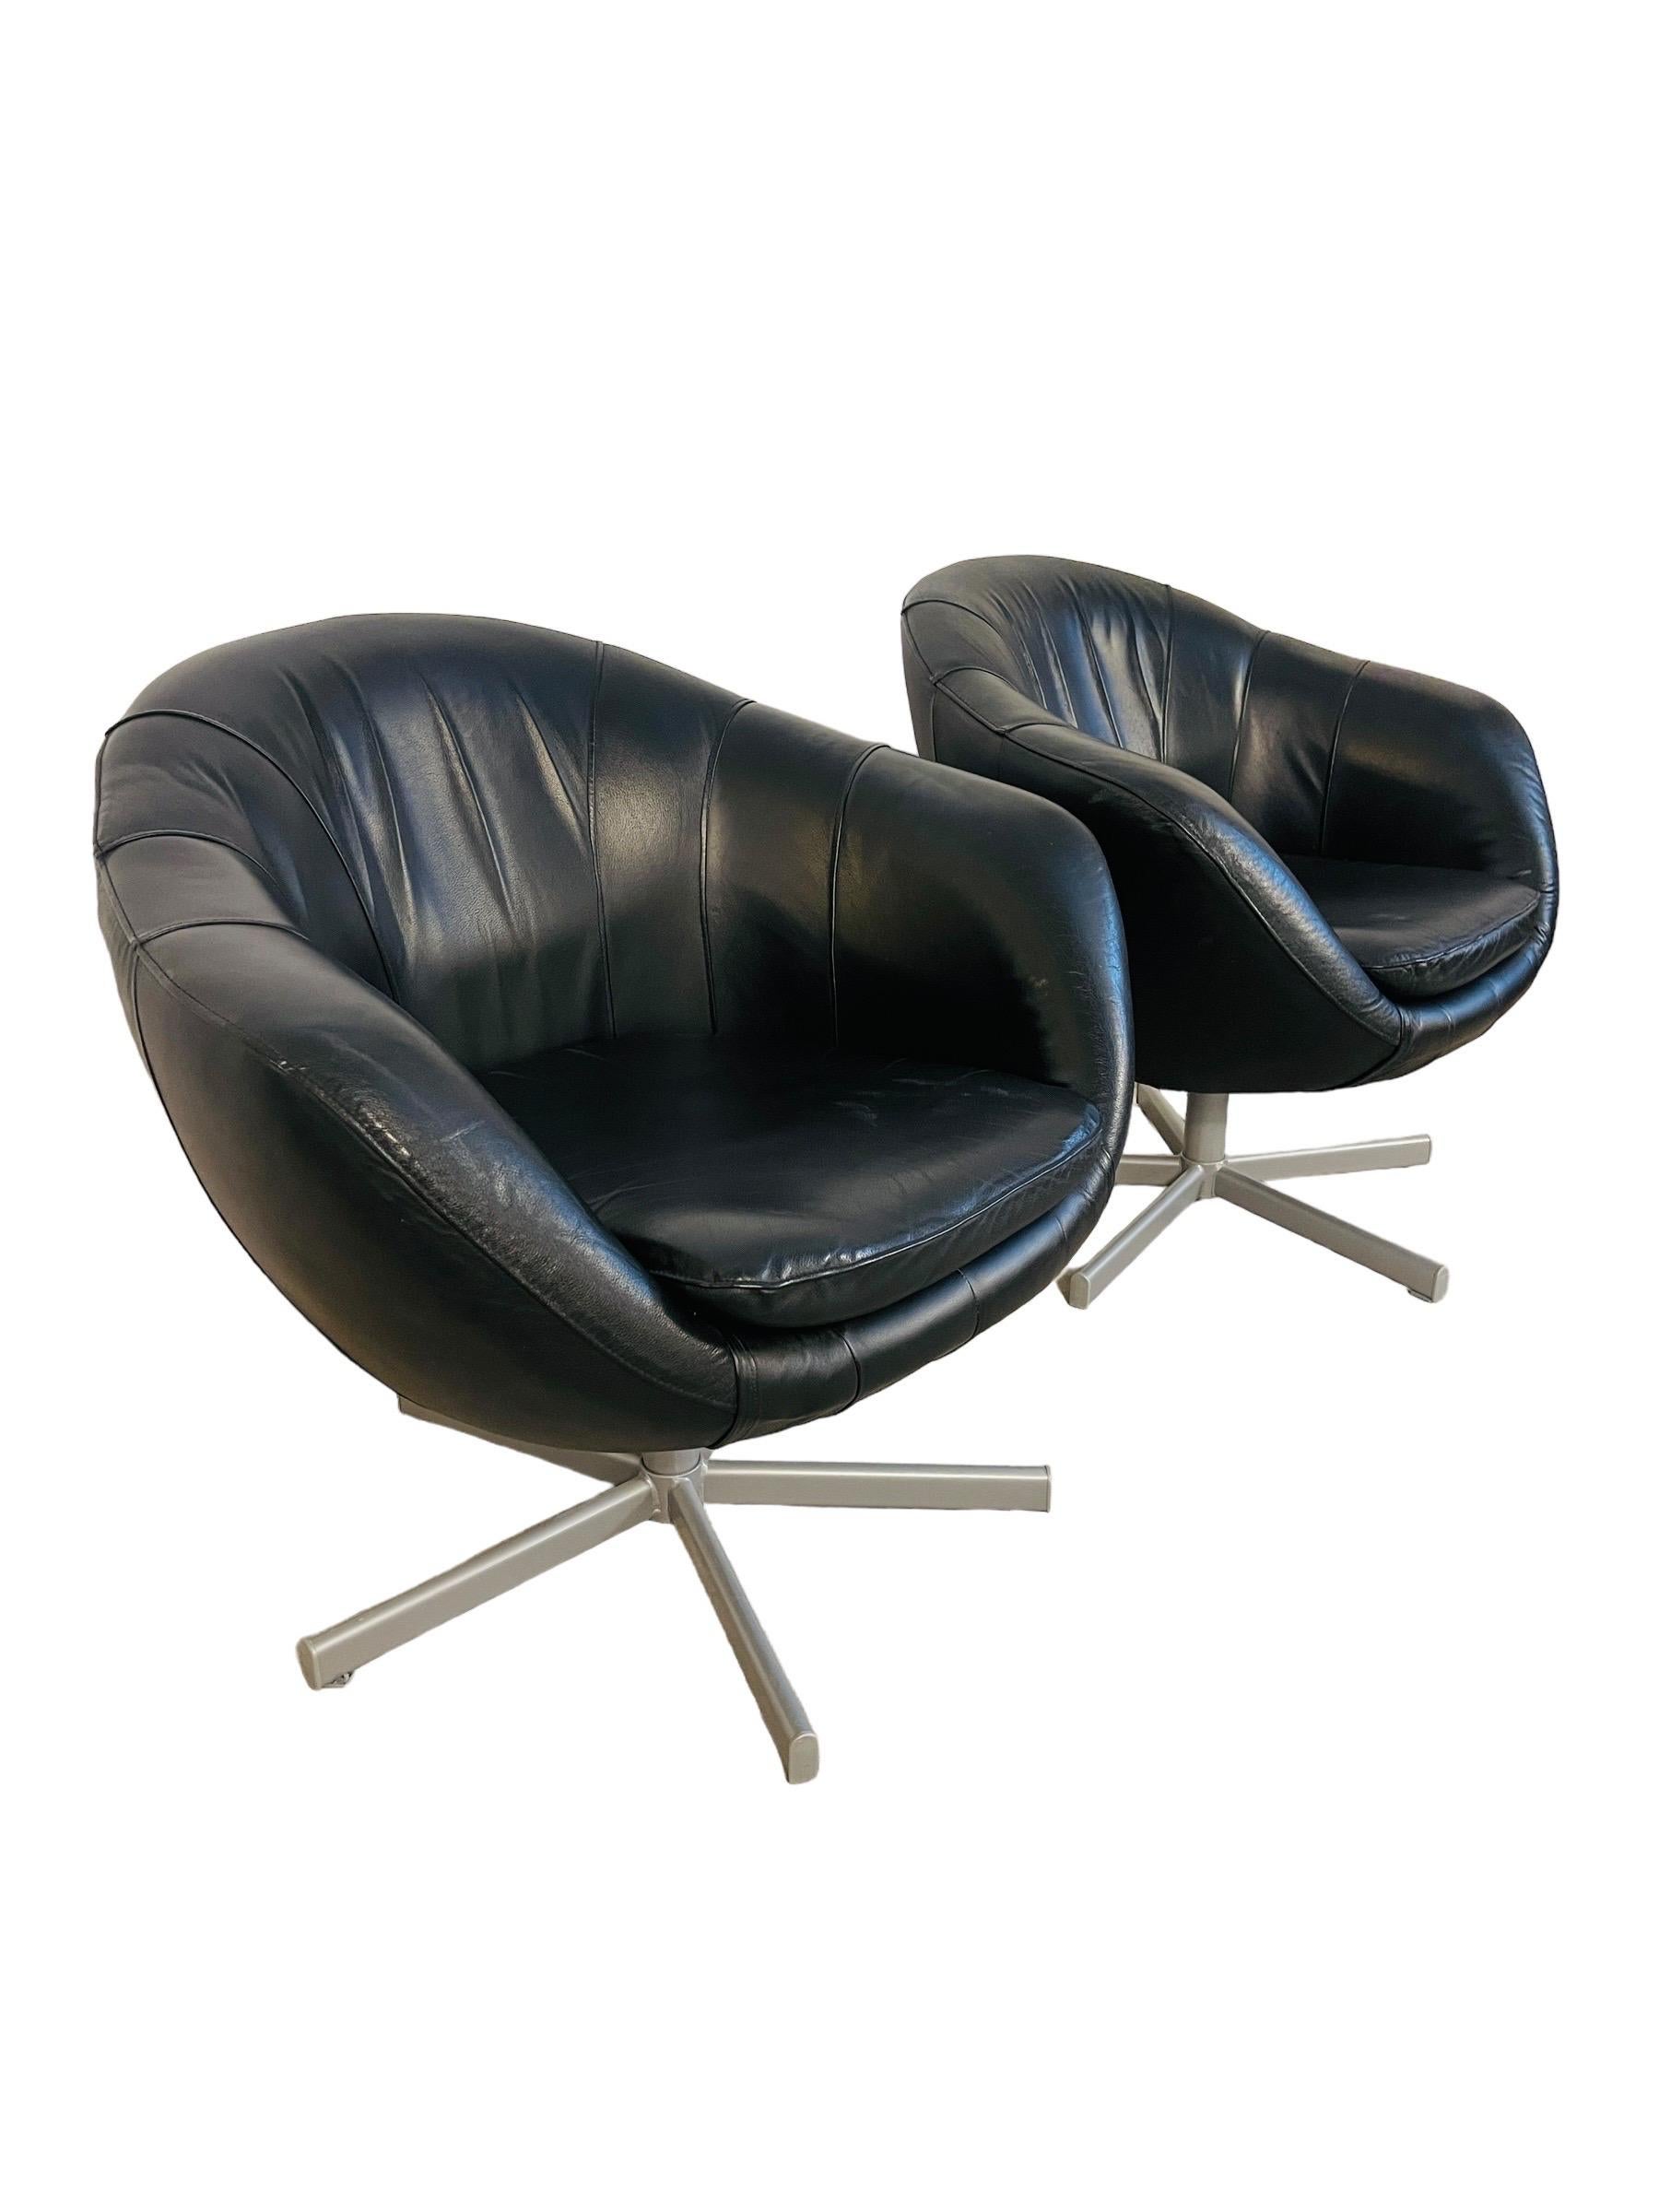 Pair Mid Century Modern Swiveling Leather Pod Chairs For Sale 4